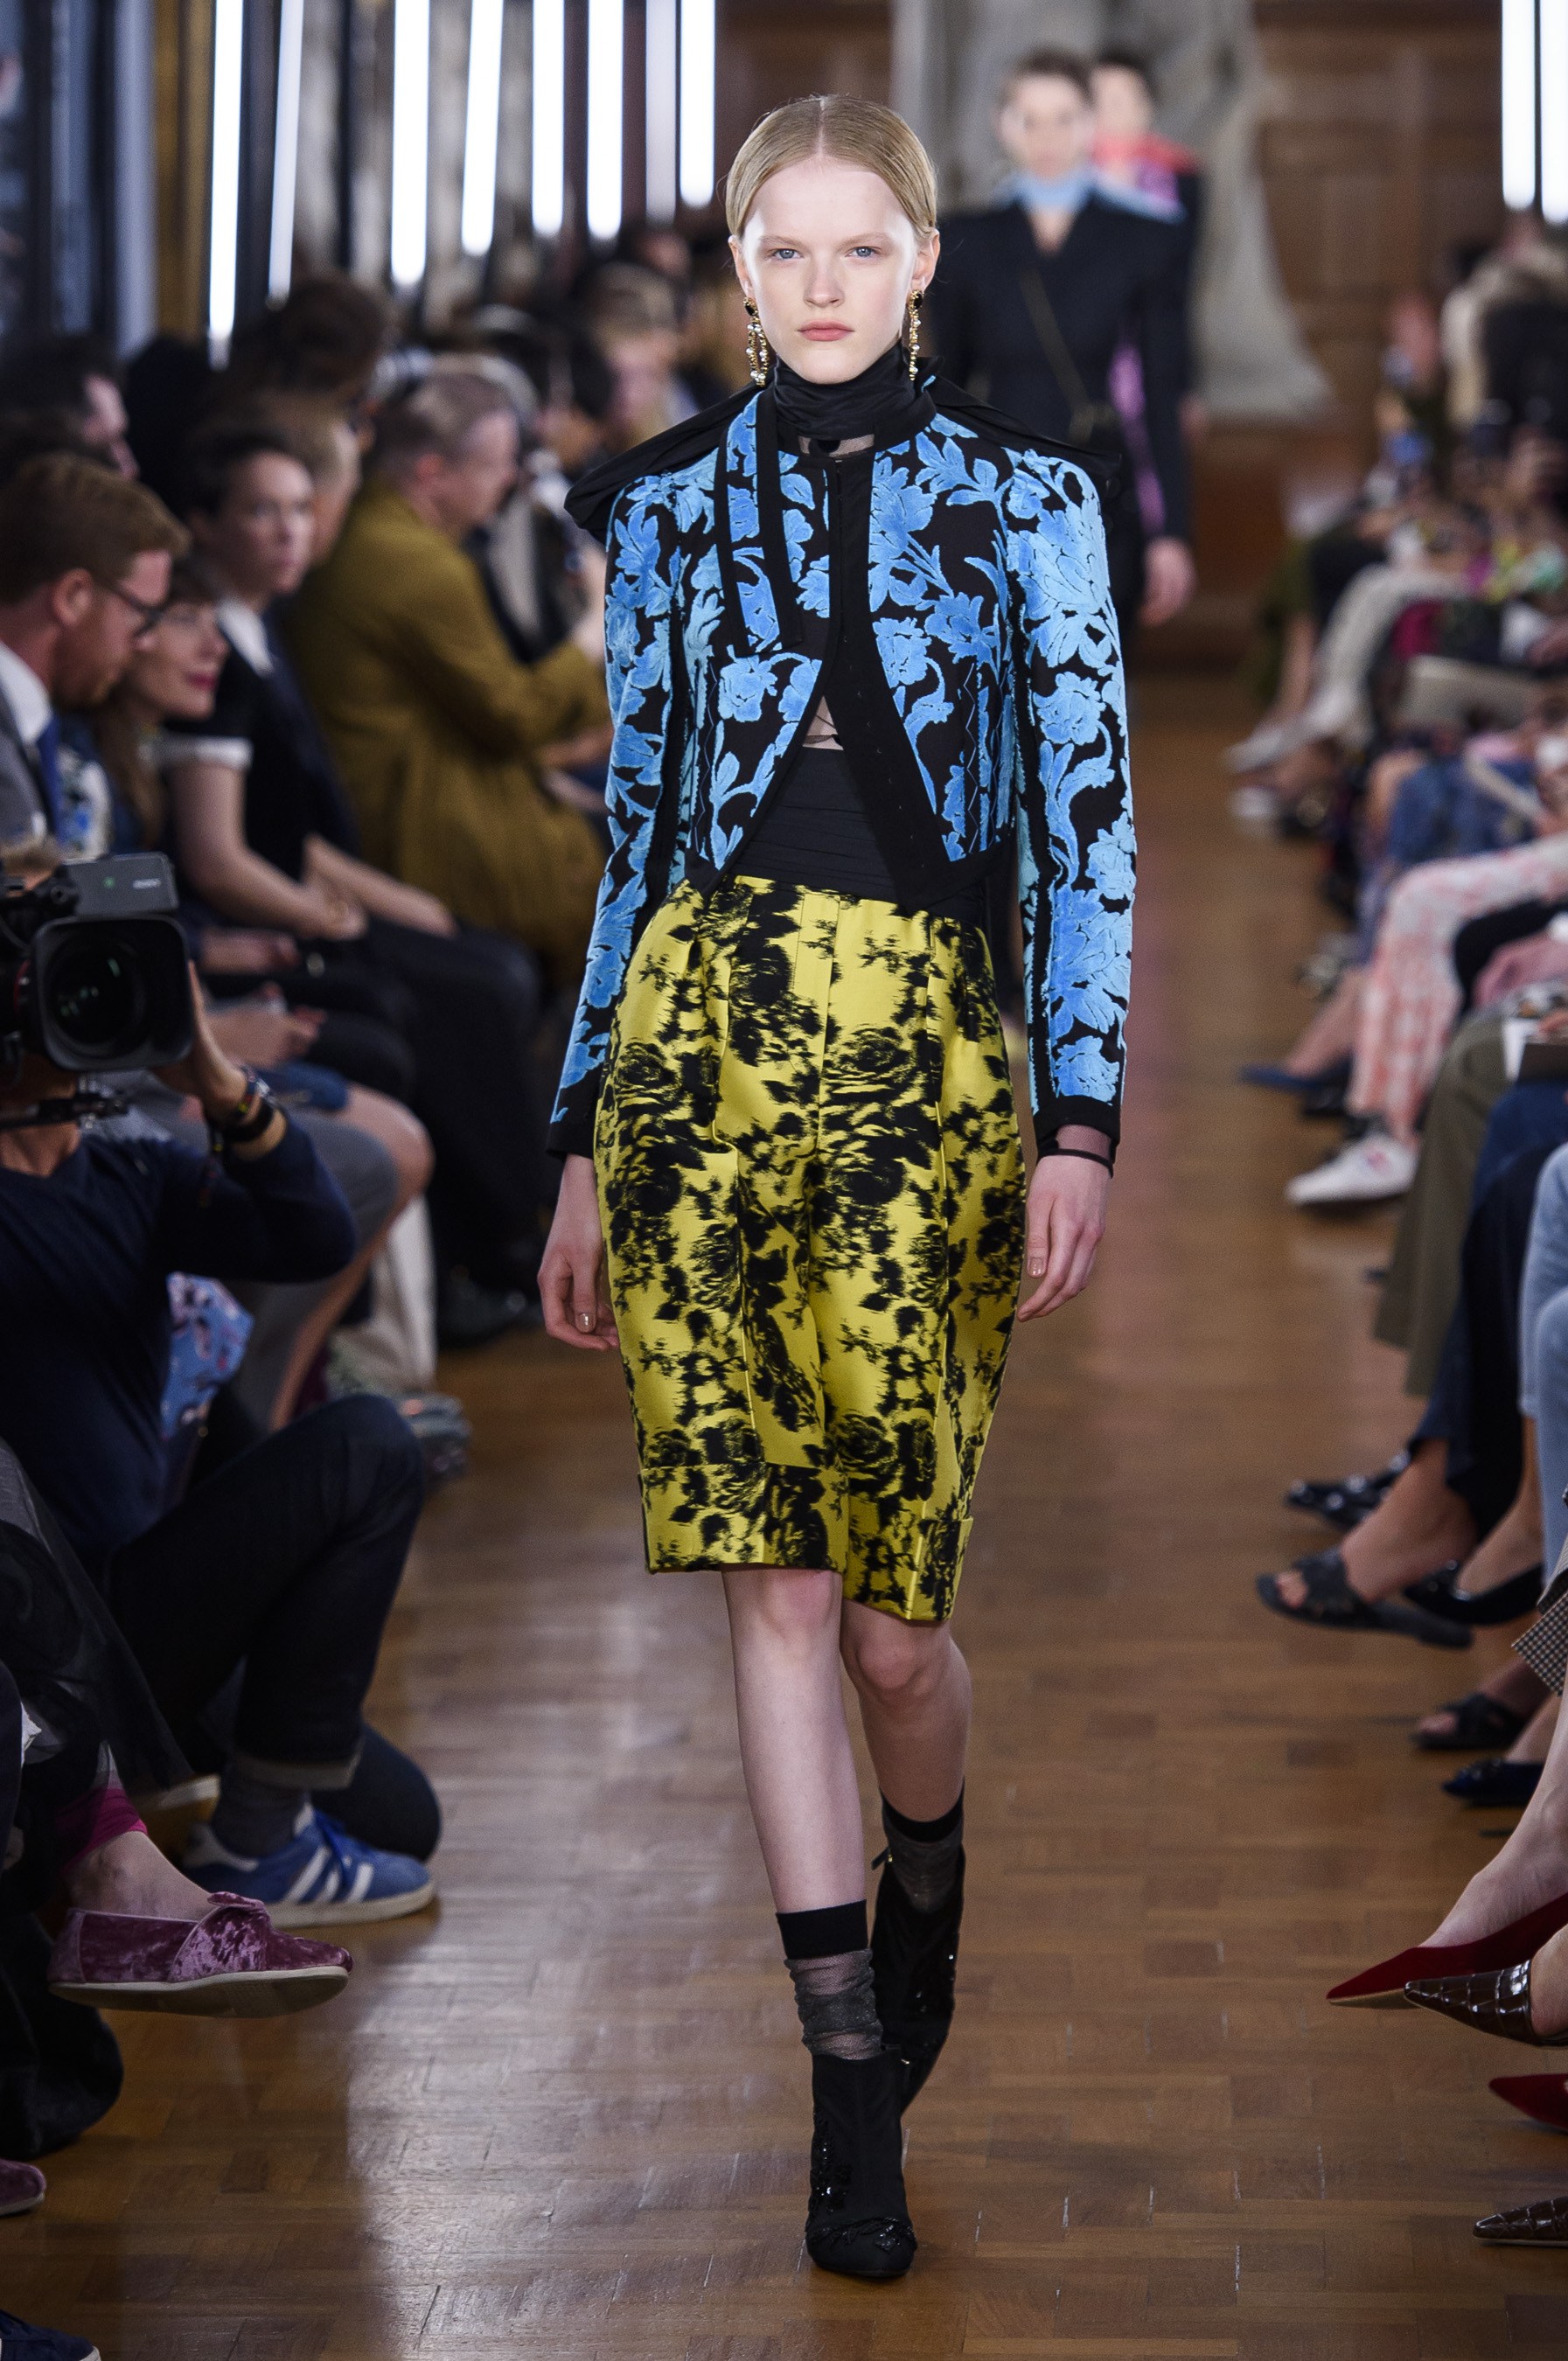 Top 10 London Spring 2019 Collections and Fashion Shows - The Impression